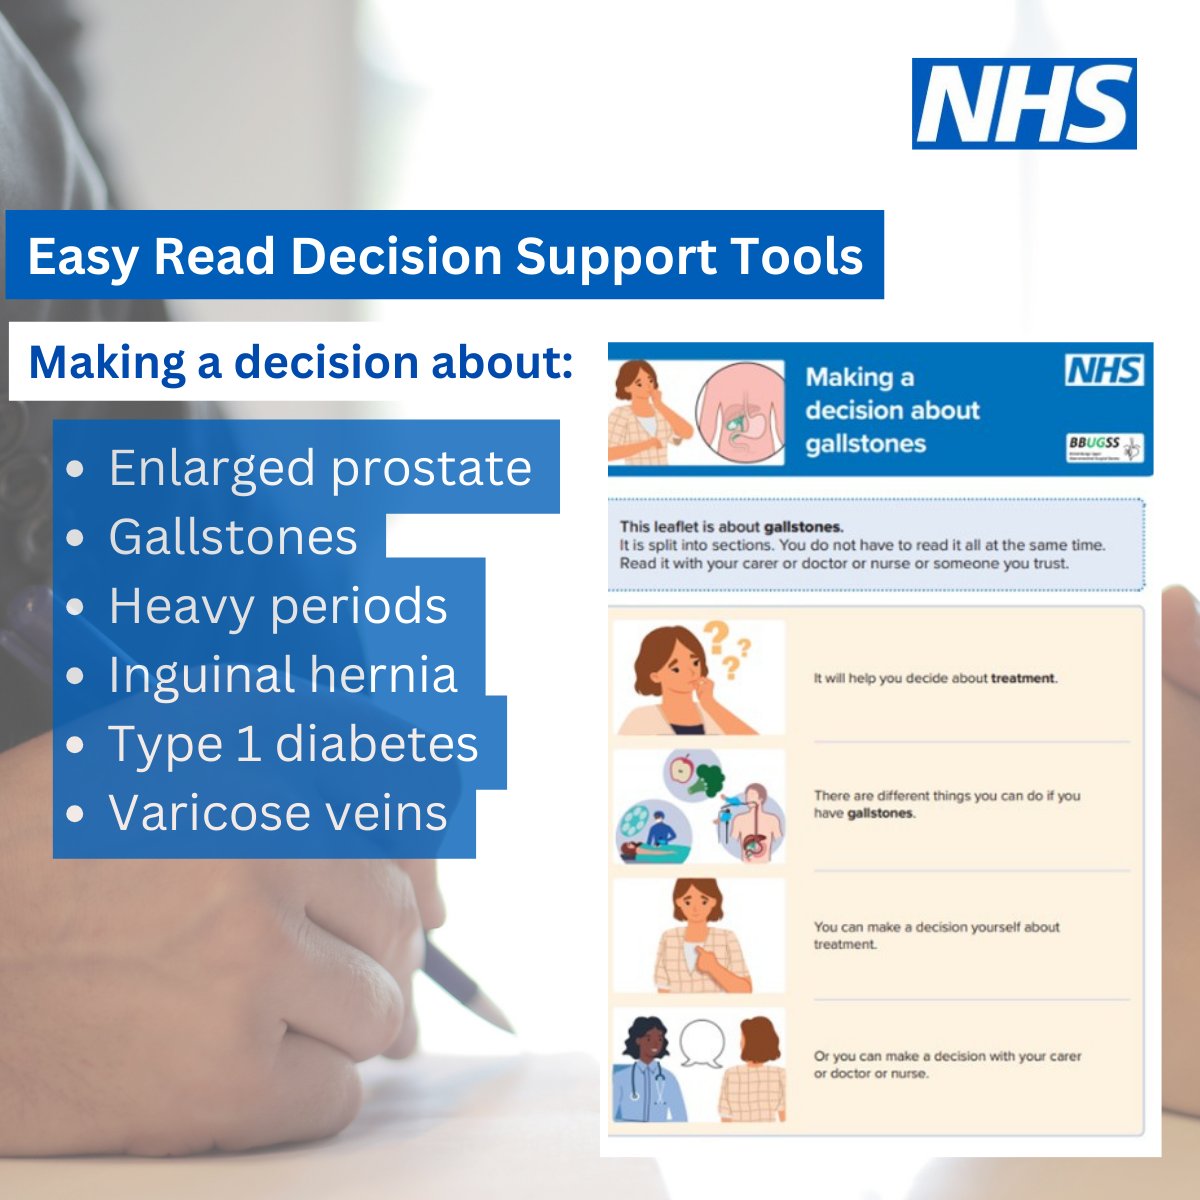 .@NHSEngland decision support tools now include Easy Read versions covering six conditions. They help shared decision making between clinician and patient by explaining treatment, care and support options to help consider what matters most to the person. england.nhs.uk/personalisedca…